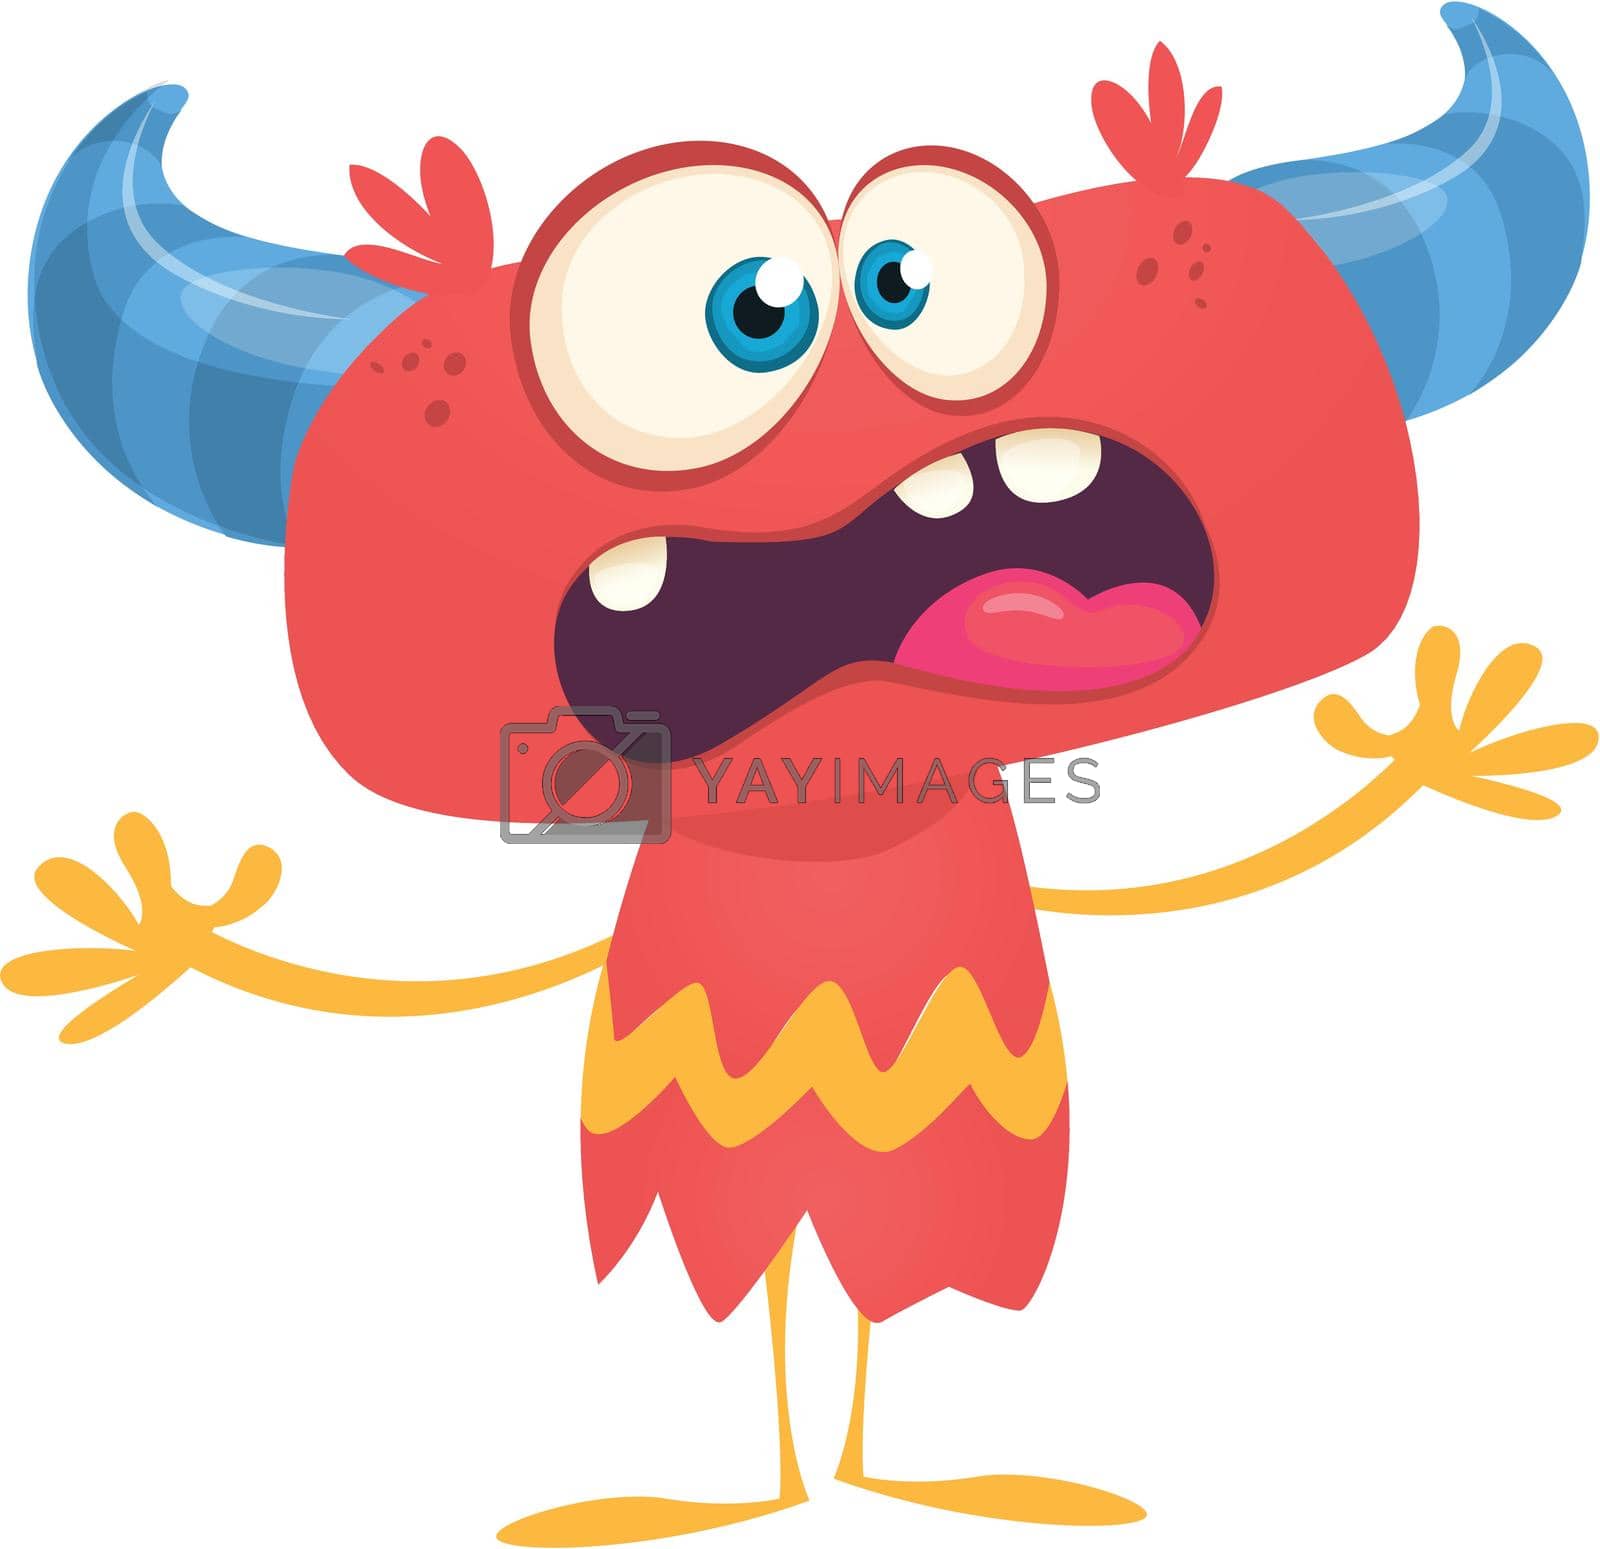 Royalty free image of Funny cartoon monster. Vector Halloween illustration by drawkman